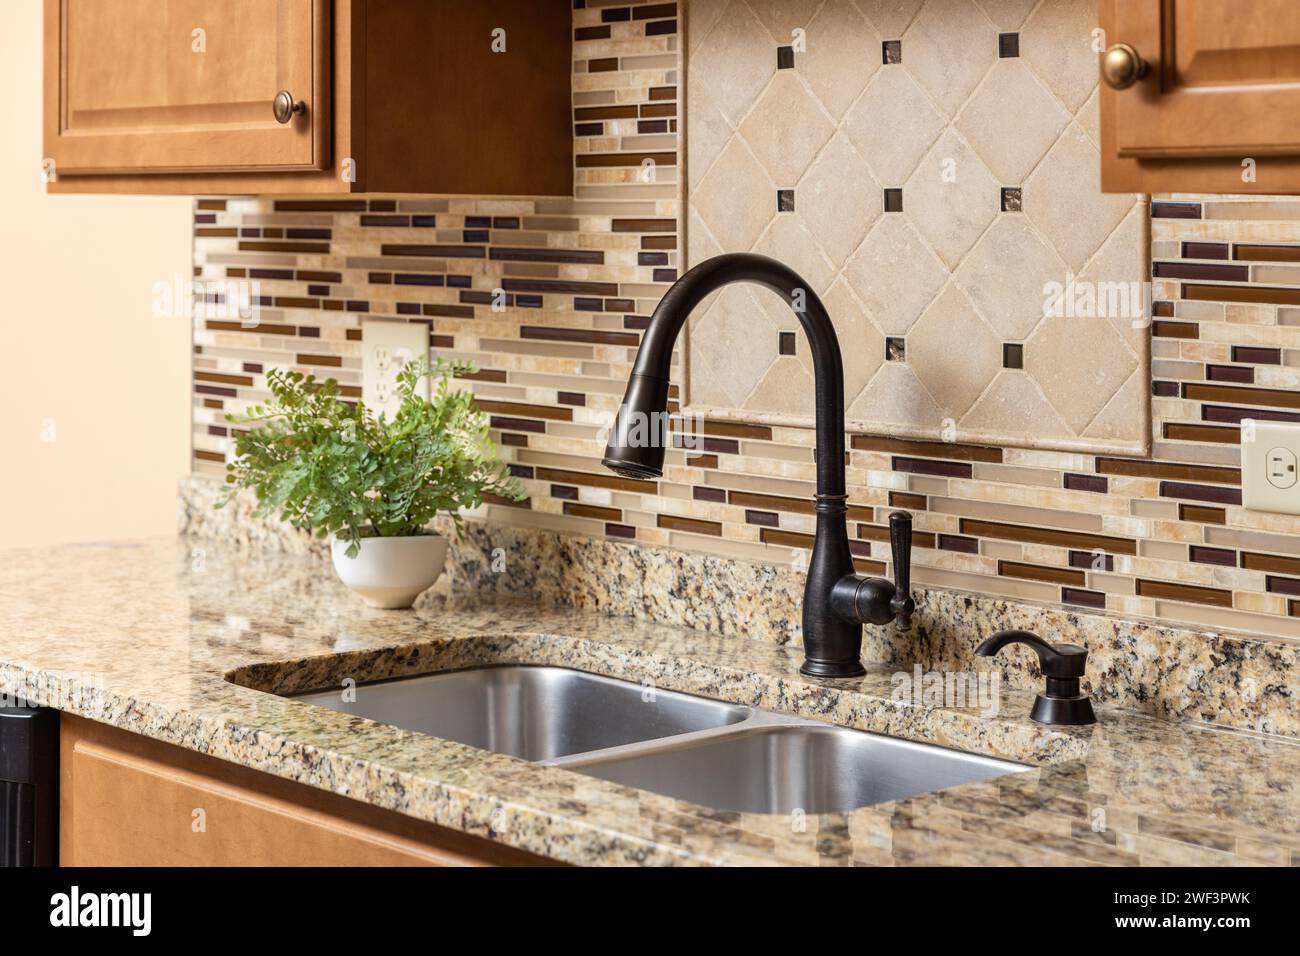 A kitchen faucet detail with wood cabinets, an oil rubbed bronze faucet, quartz countertop, and glass and stone tile backsplash. Stock Photo